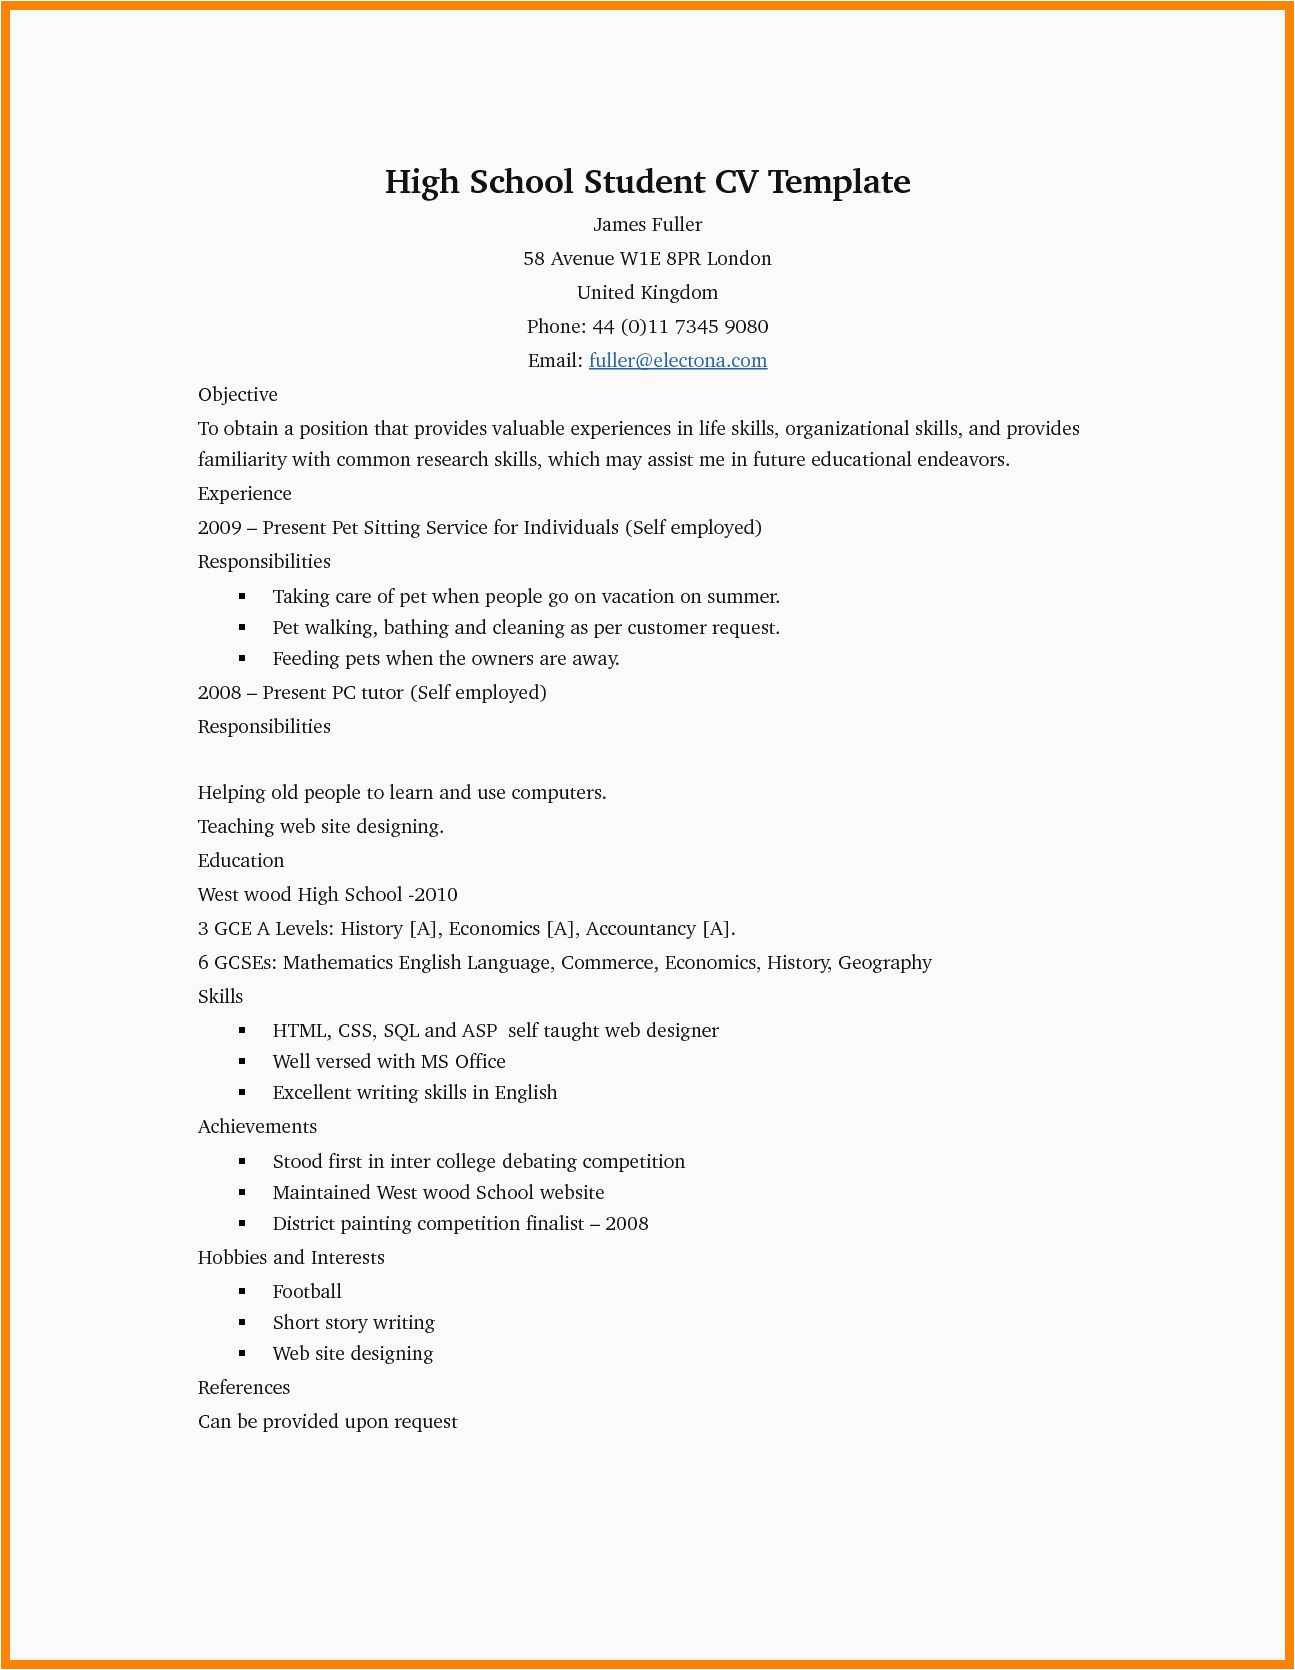 Resume Template for High School Students Australia Resume Examples for Highschool Students Inspirational 5 Cv